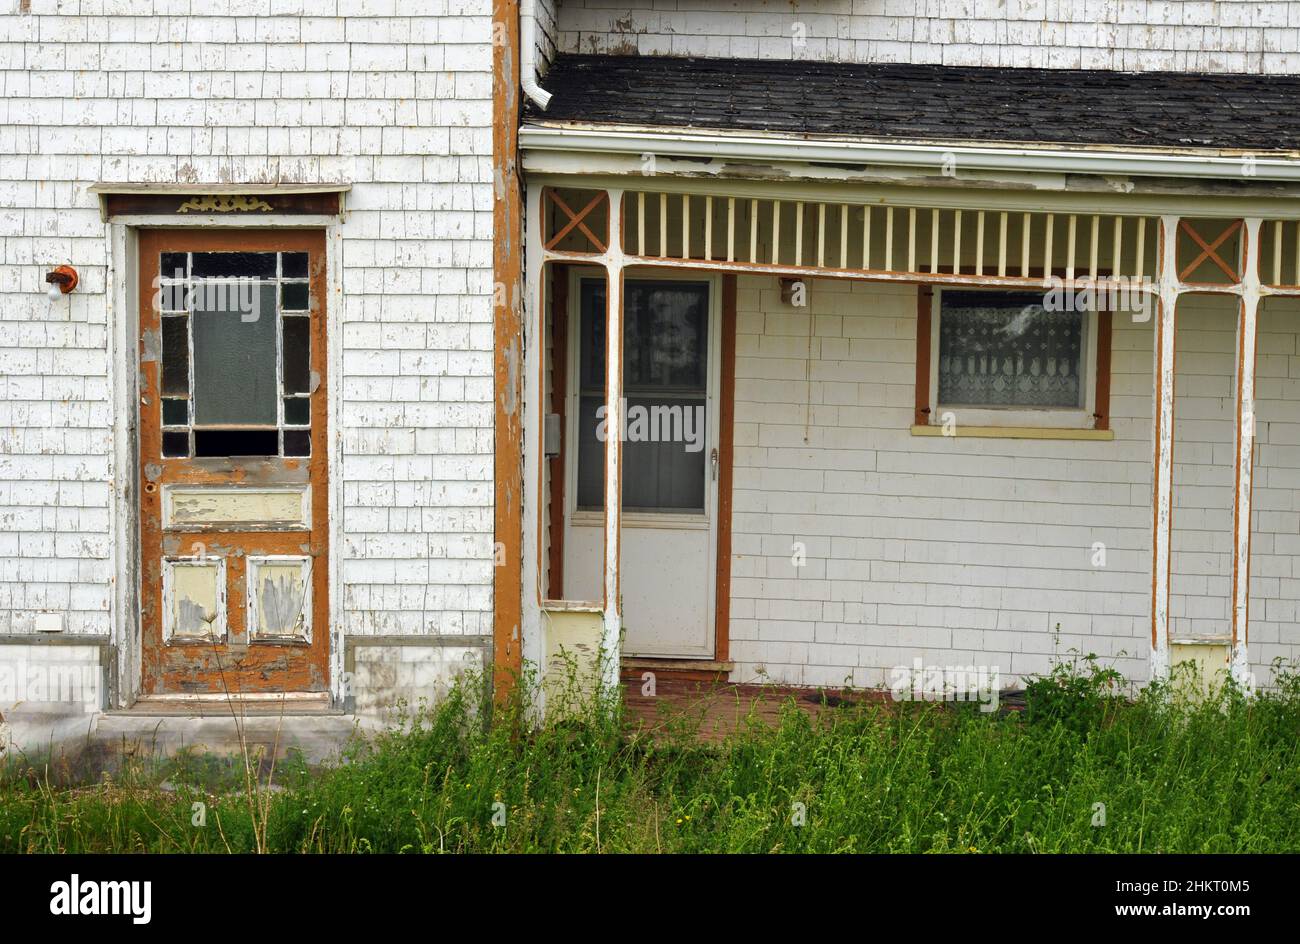 The doorway and porch of an old home faced with wood shingles in Hampton, Prince Edward Island. Stock Photo